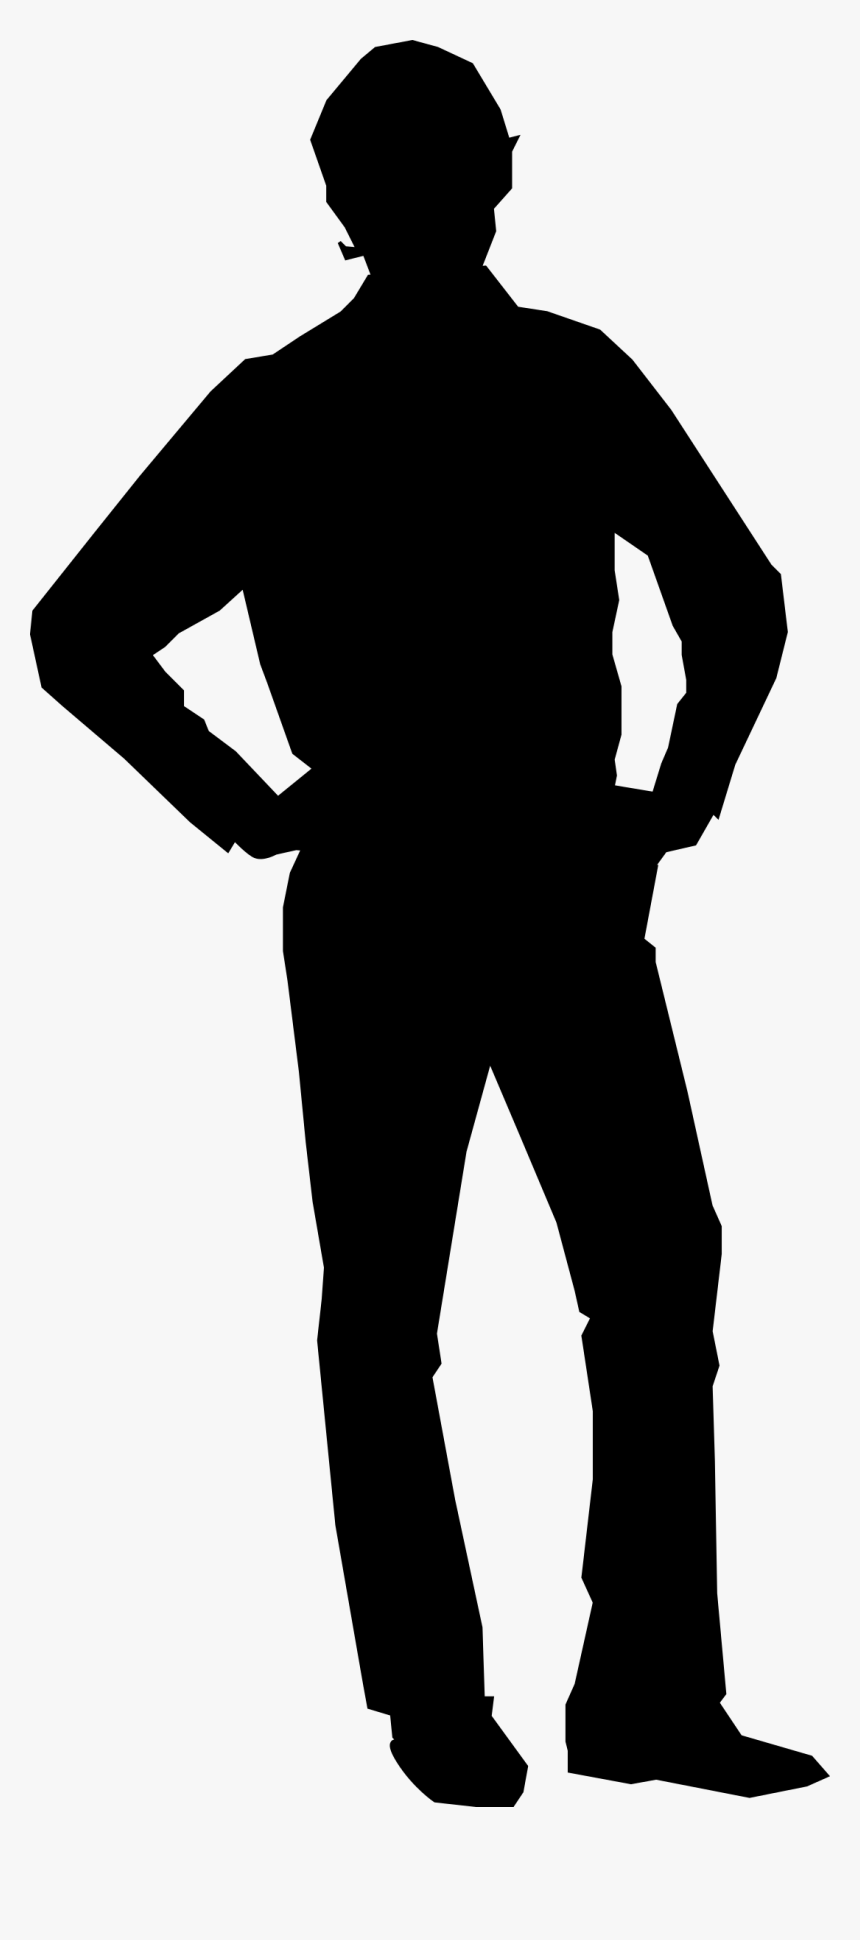 Male Silhouette Png -akimbo Male Man Silhouette Png - Hands On Hips Silhouette, Transparent Png, Free Download